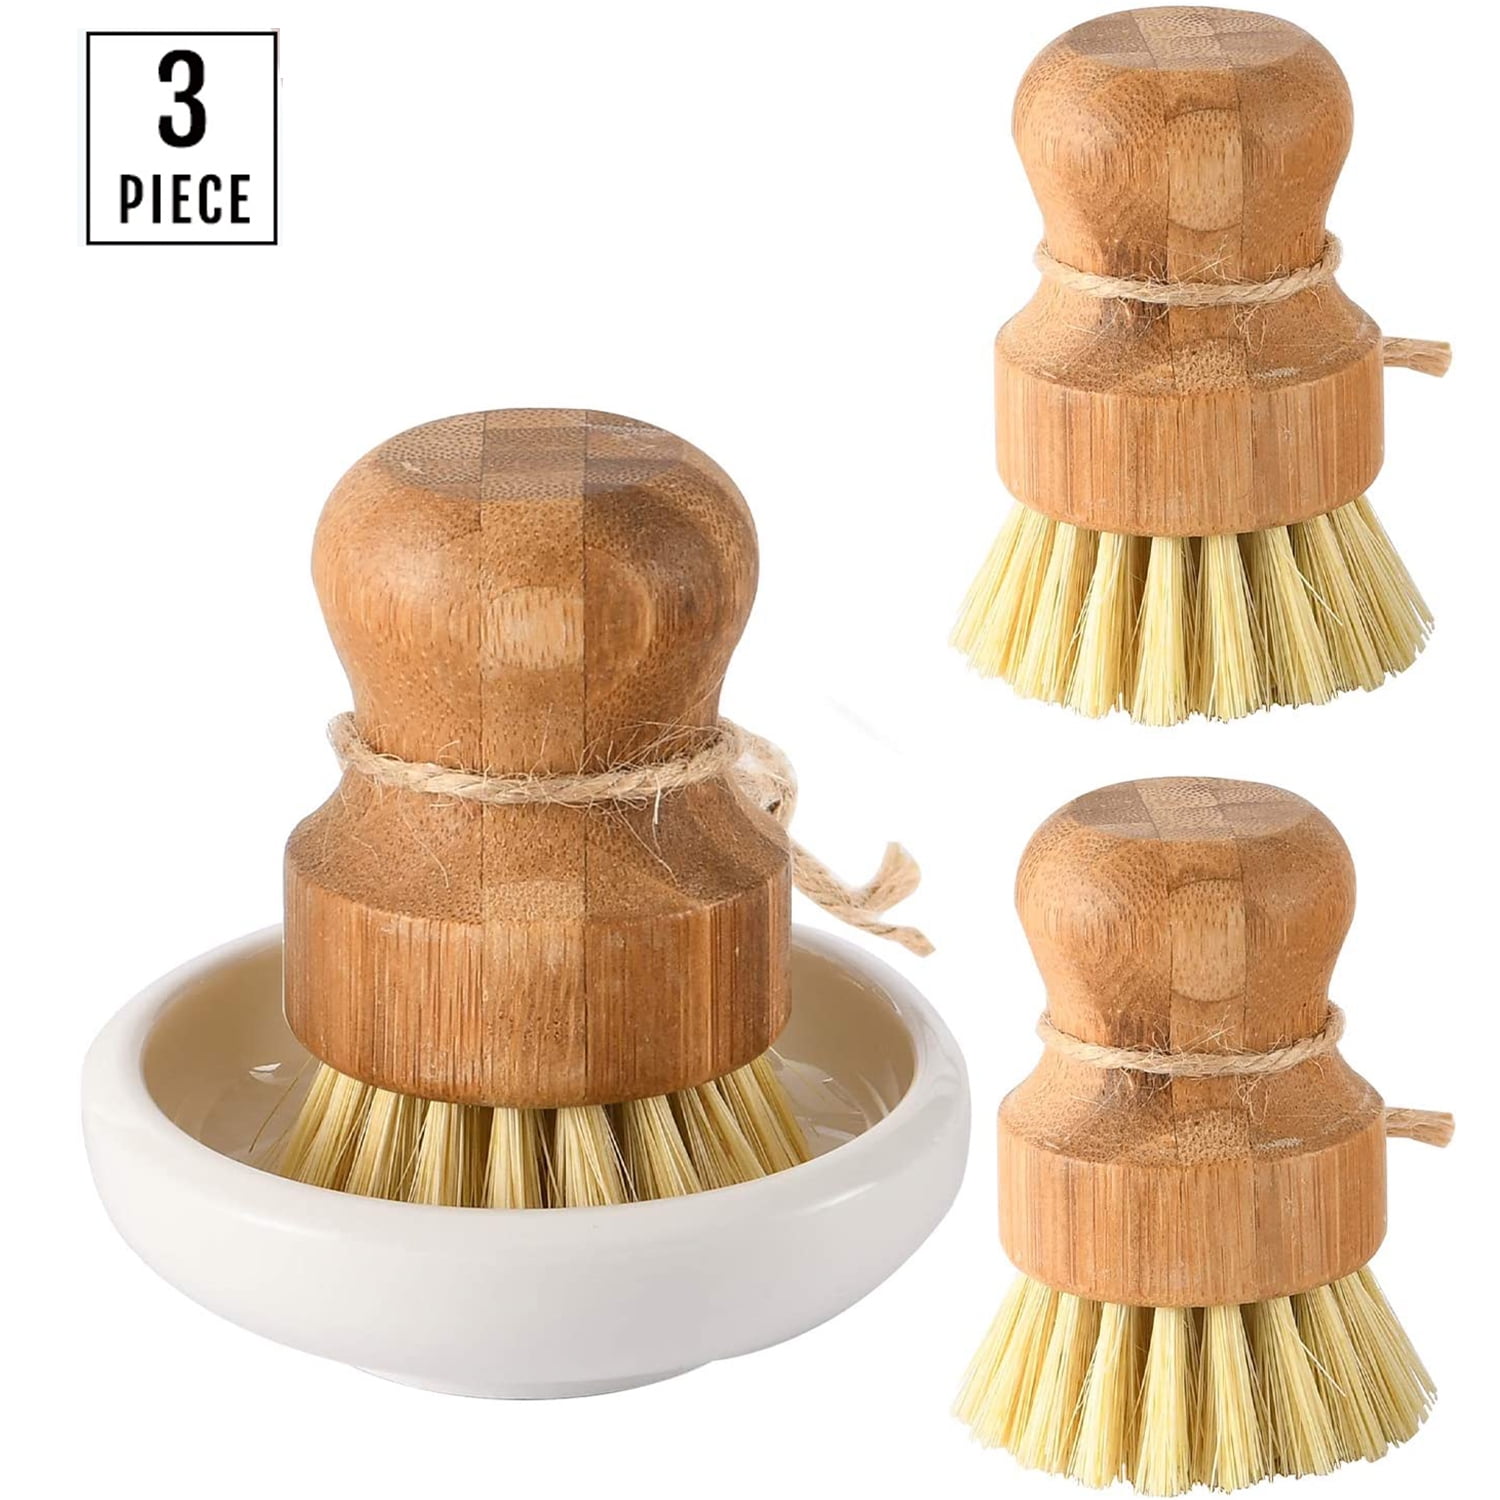 3pc Durable Dish Wand Scrubber Cleaning Kitchen Dishes Scrubbing Brush Set 